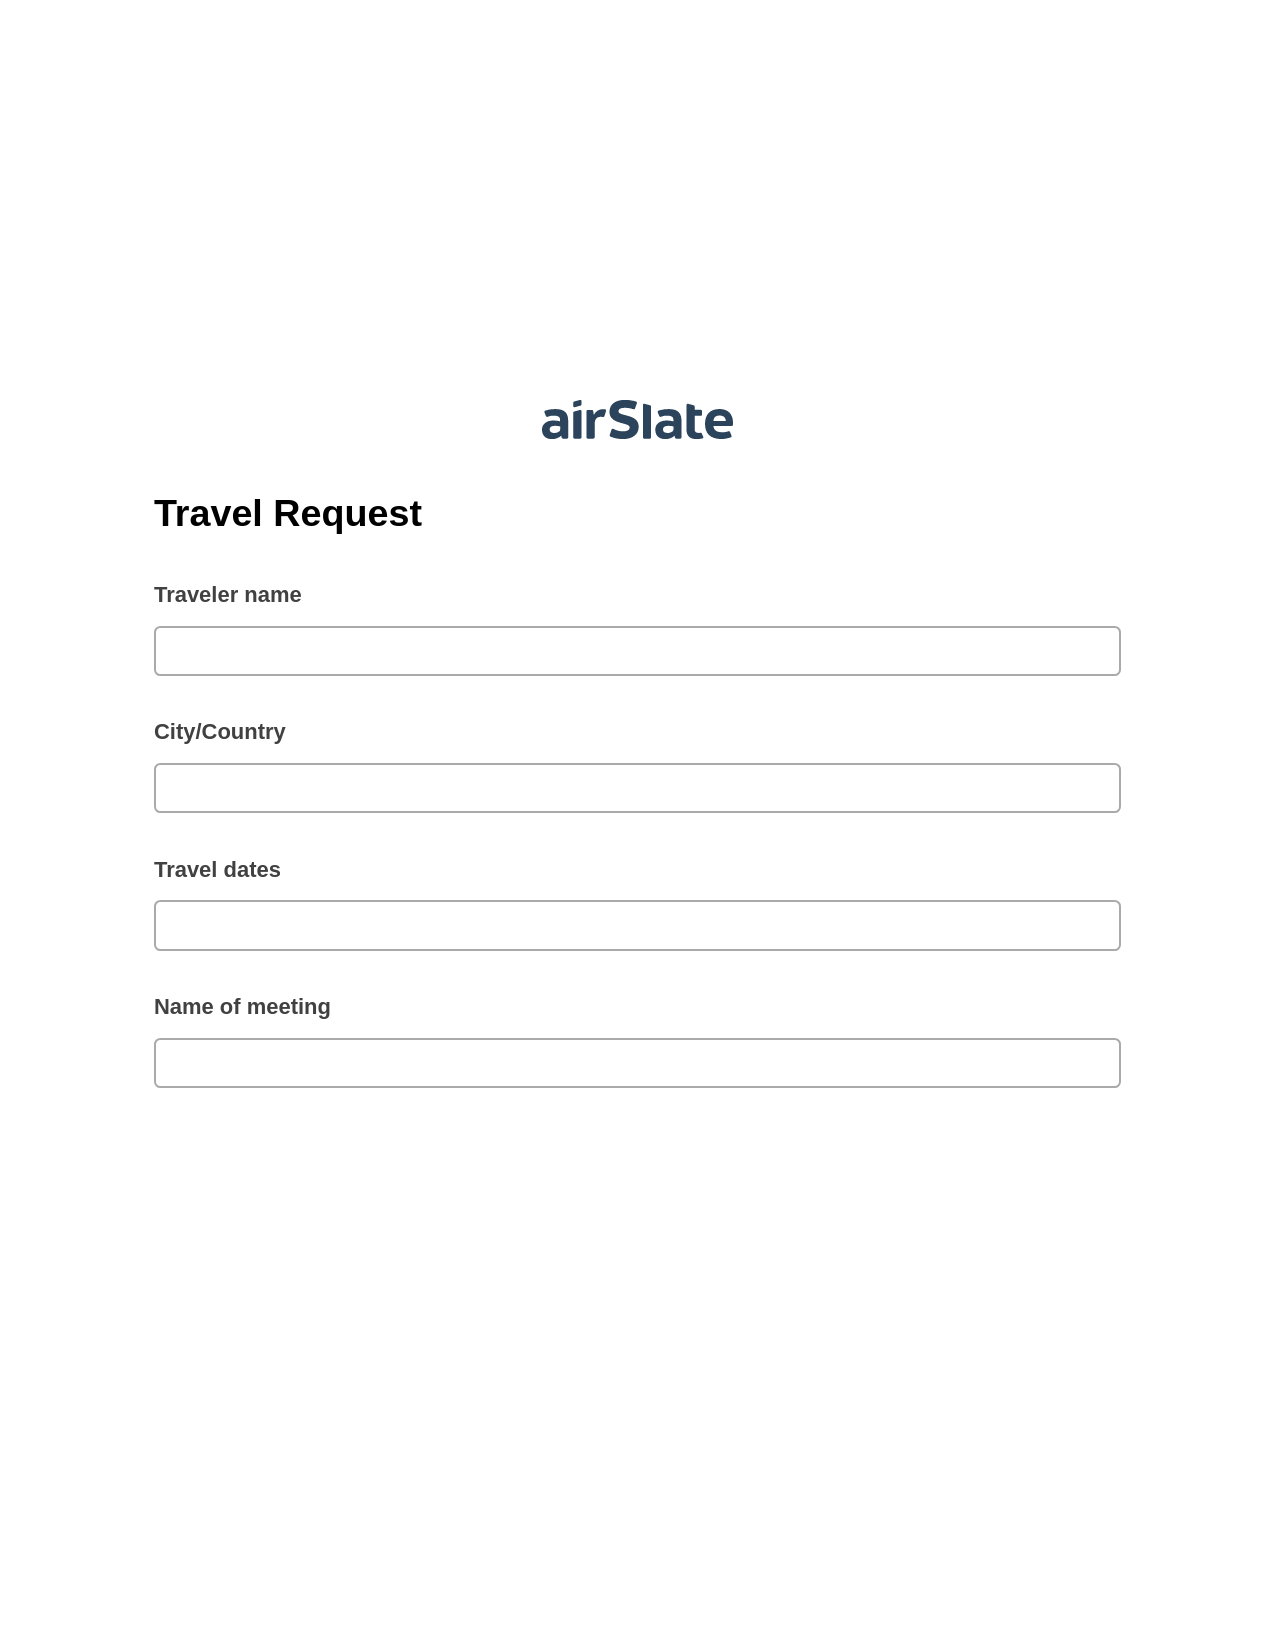 Travel Request Pre-fill from Litmos bot, Create slate addon, Export to NetSuite Record Bot